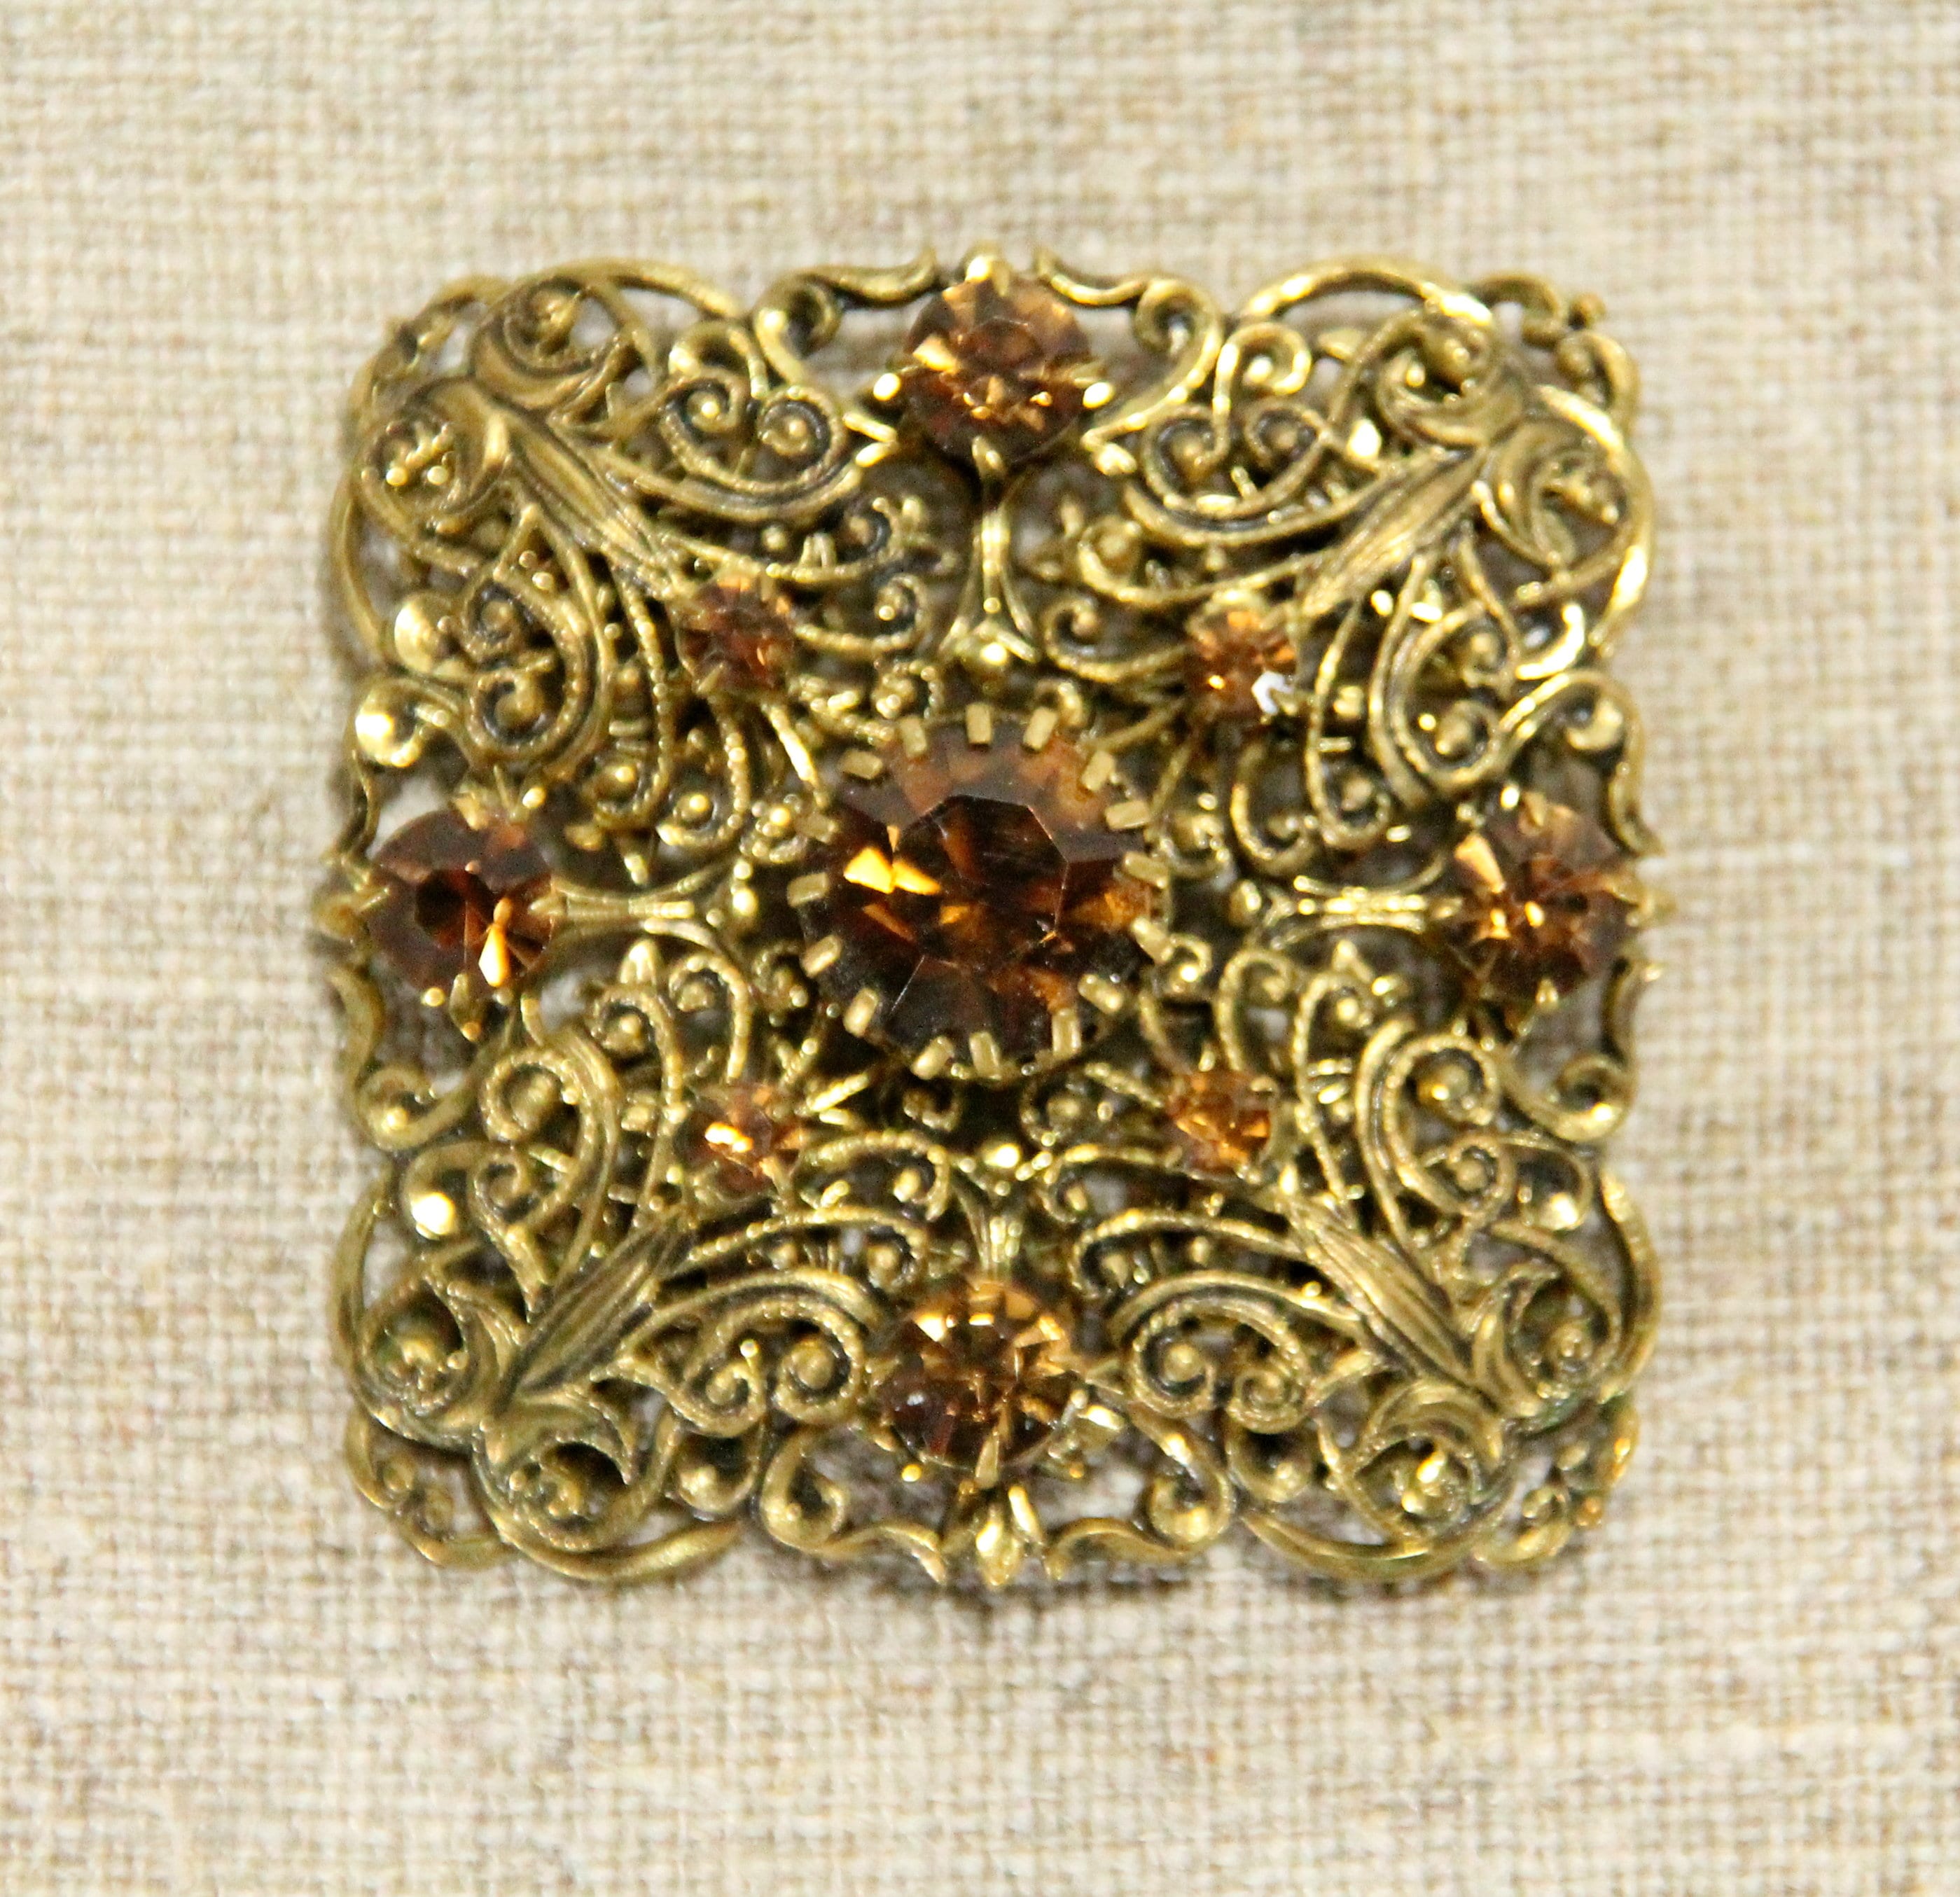 Vintage Brooch, Antique Accessory for Her, Costume Jewelry